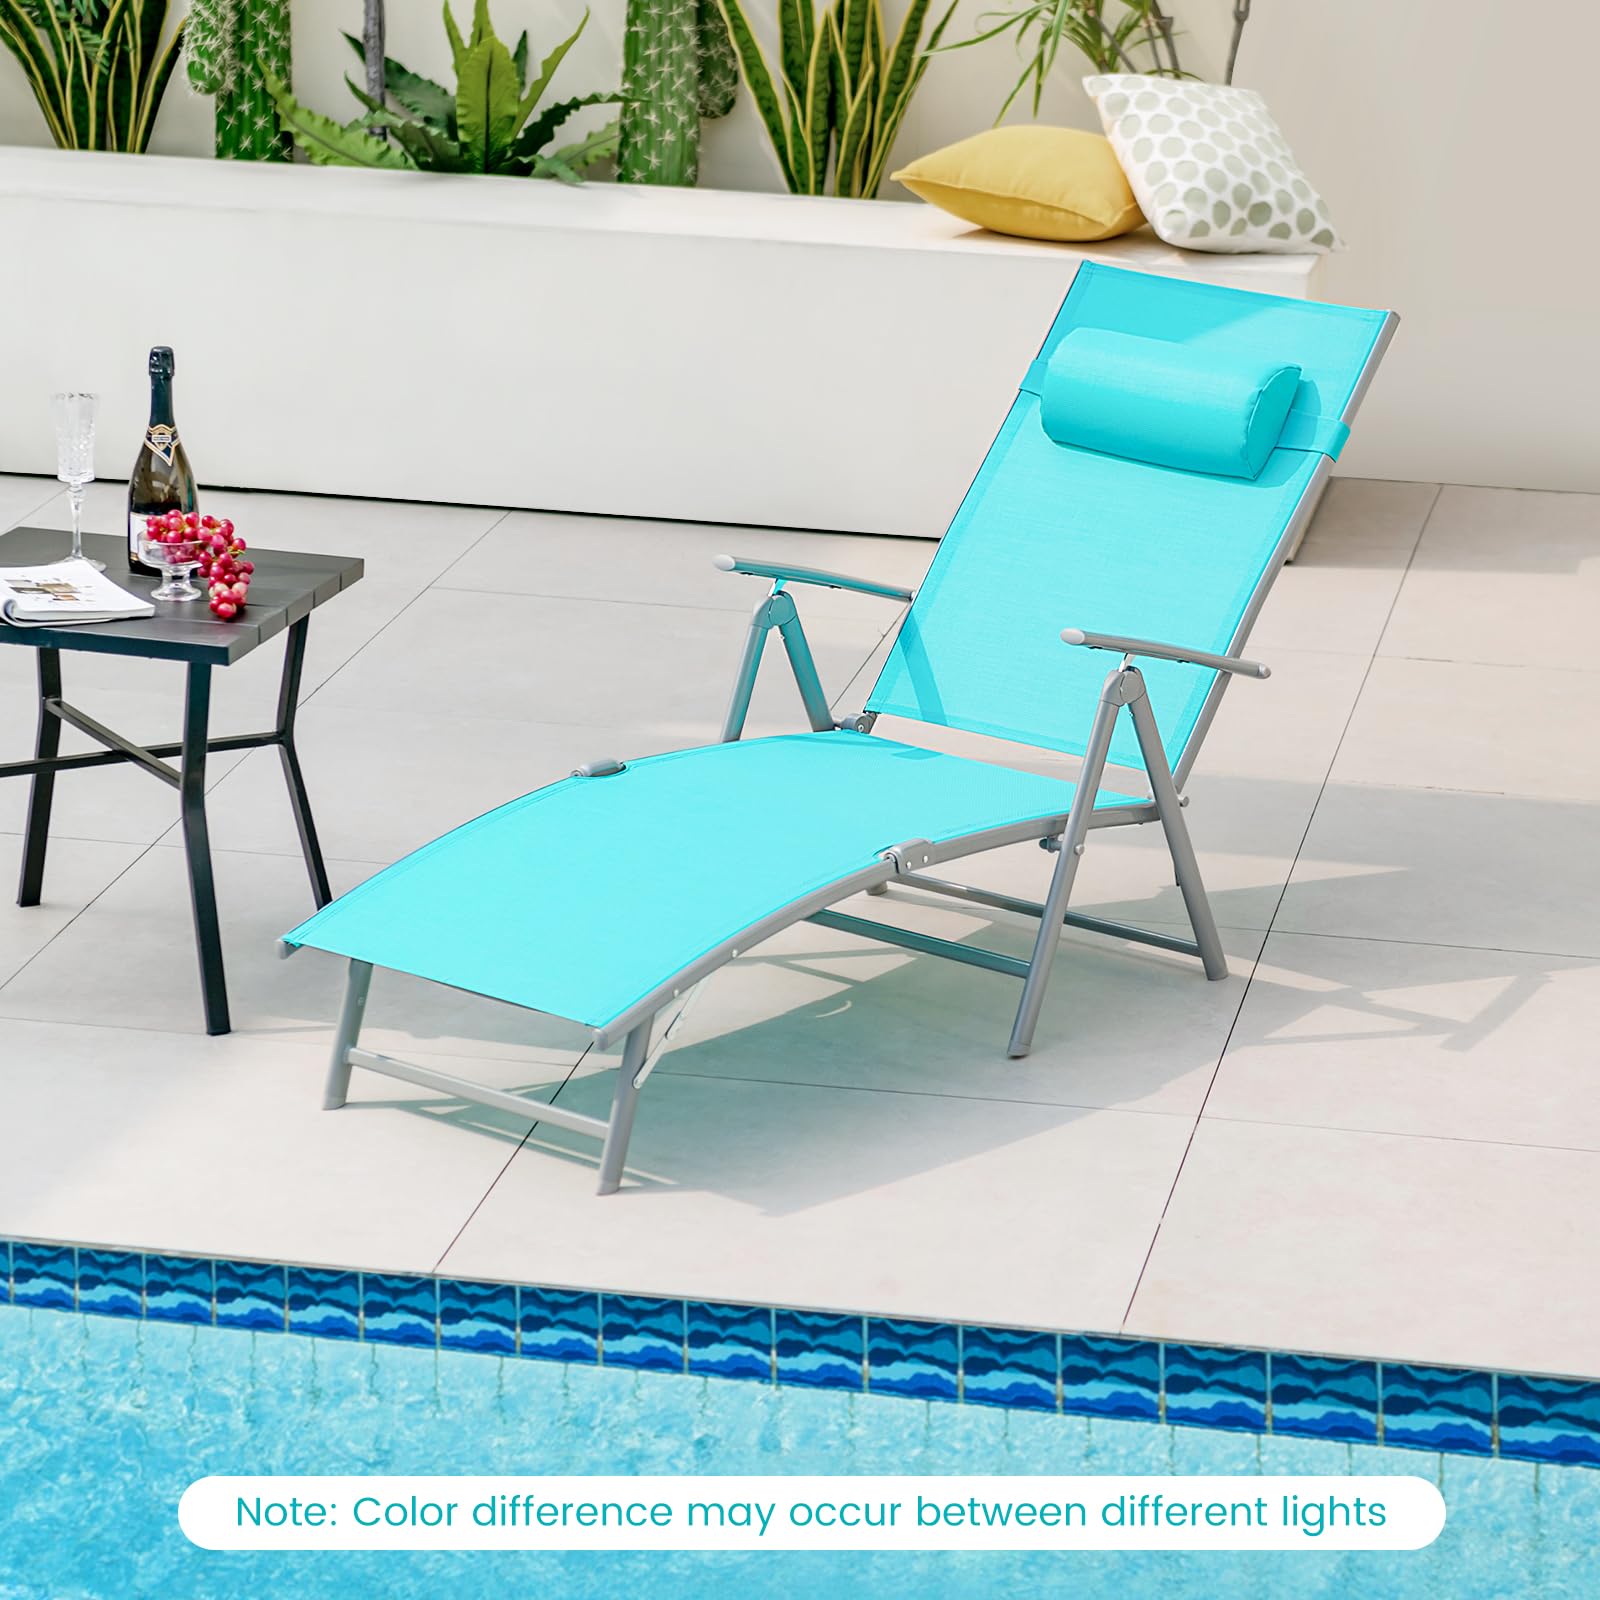 Giantex Folding Chaise Lounge Chair - Outdoor Reclining Chair with Removable Seat Cushion, Headrest Pillow